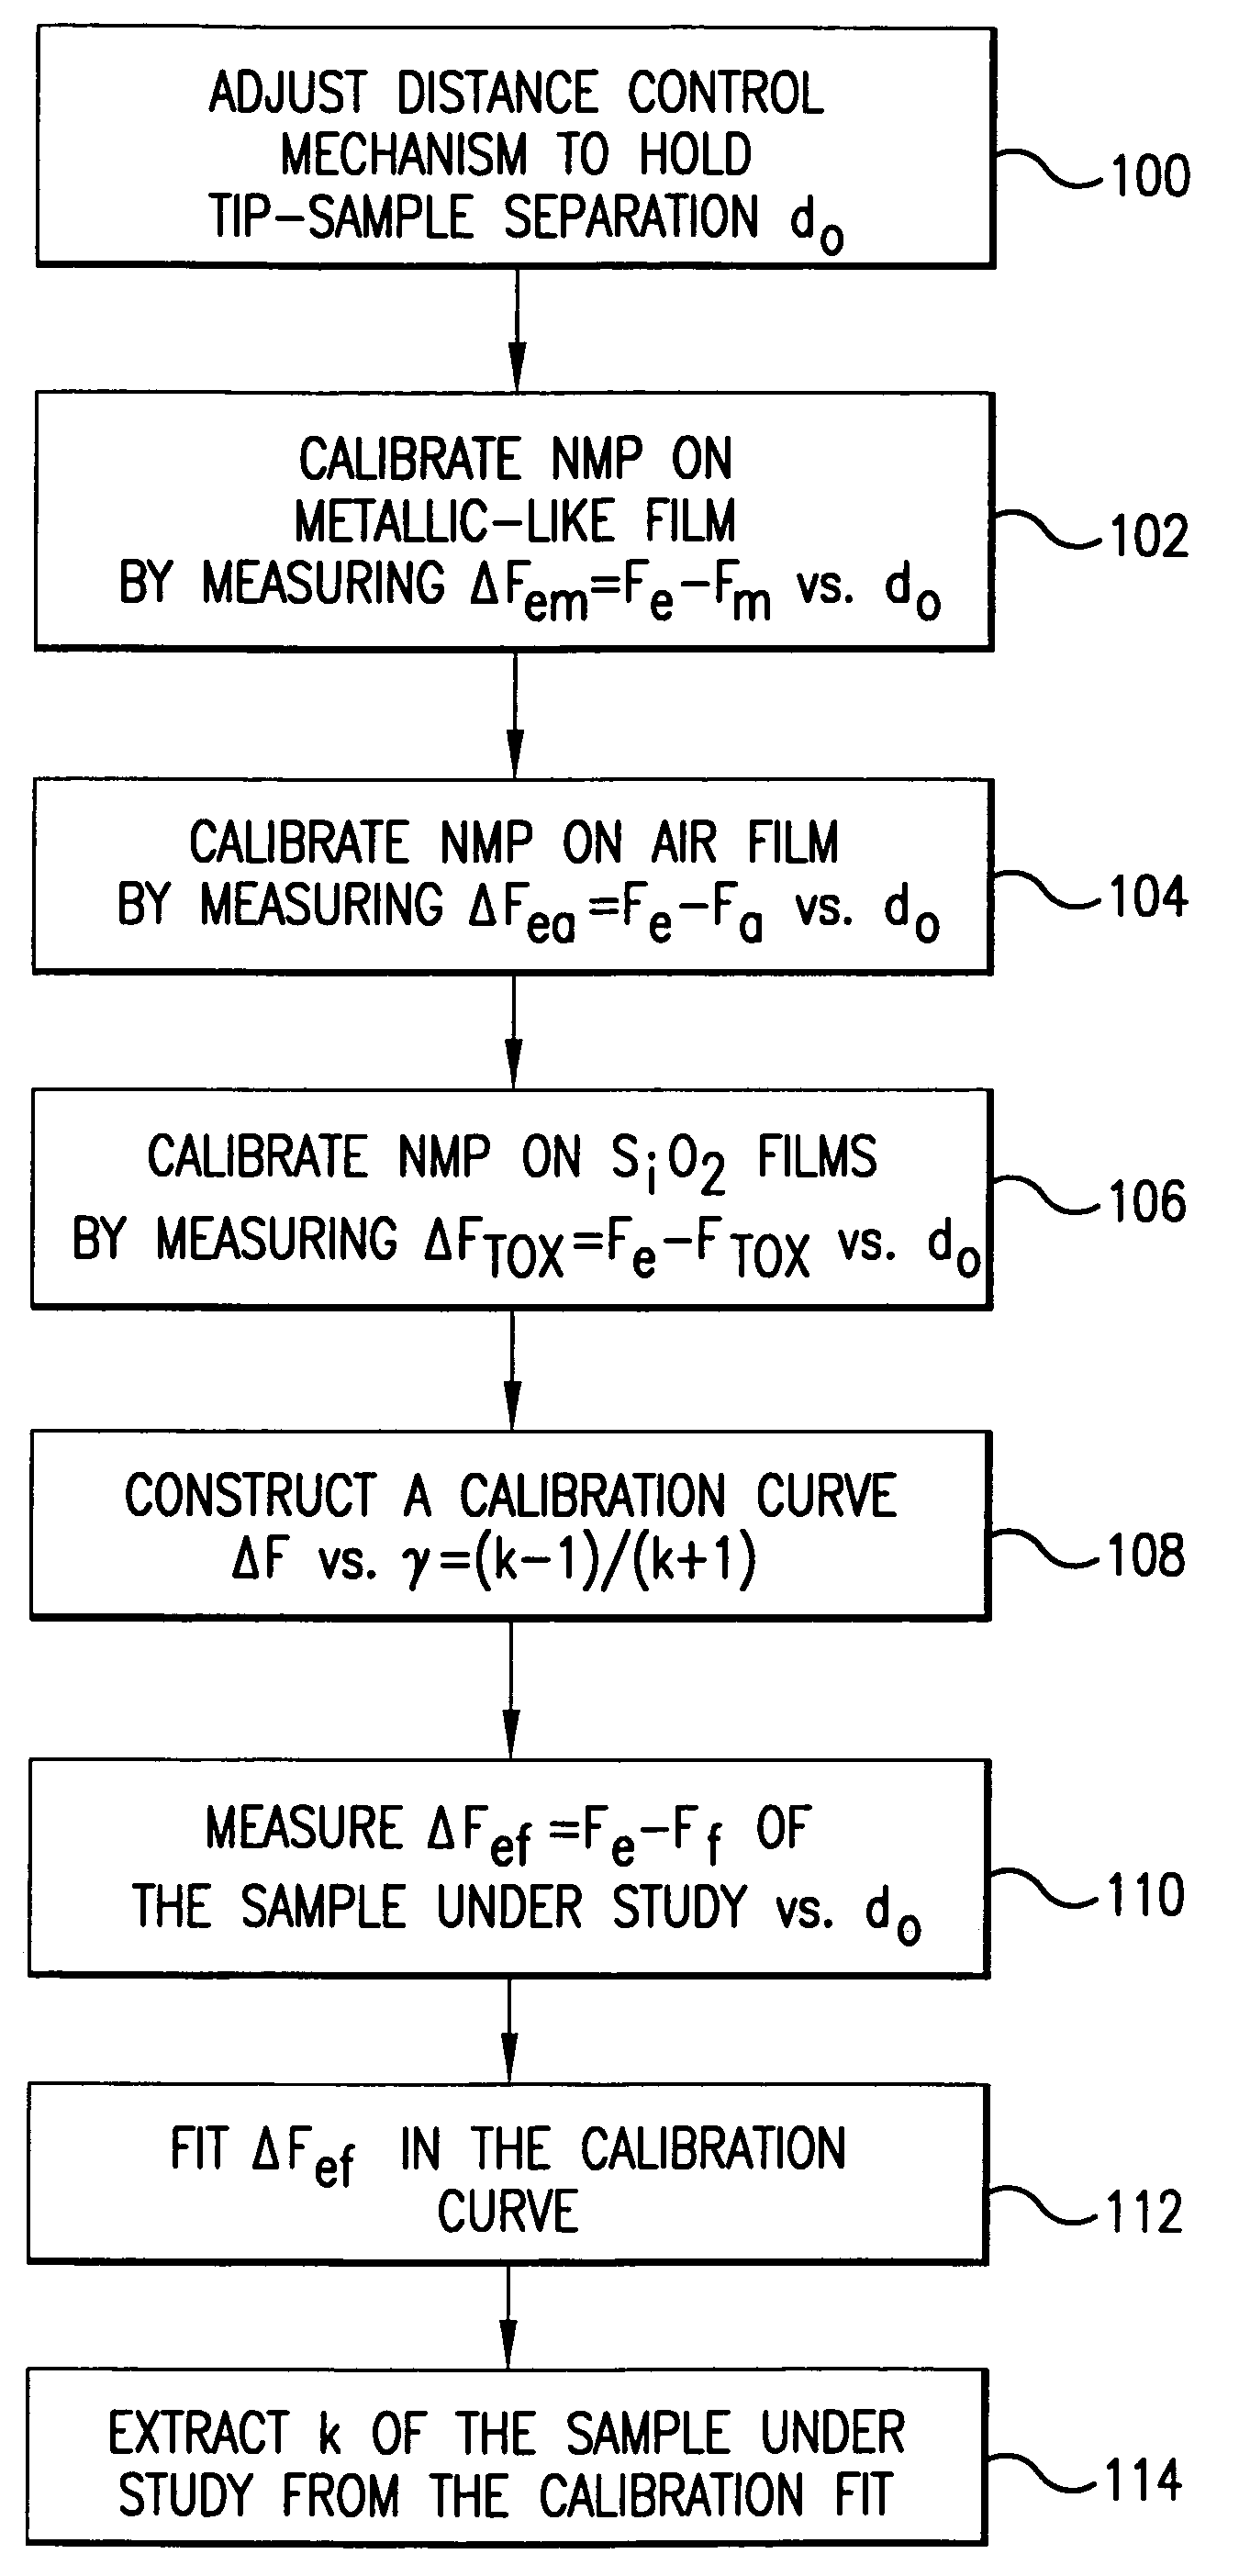 Method and system for measurement of dielectric constant of thin films using a near field microwave probe